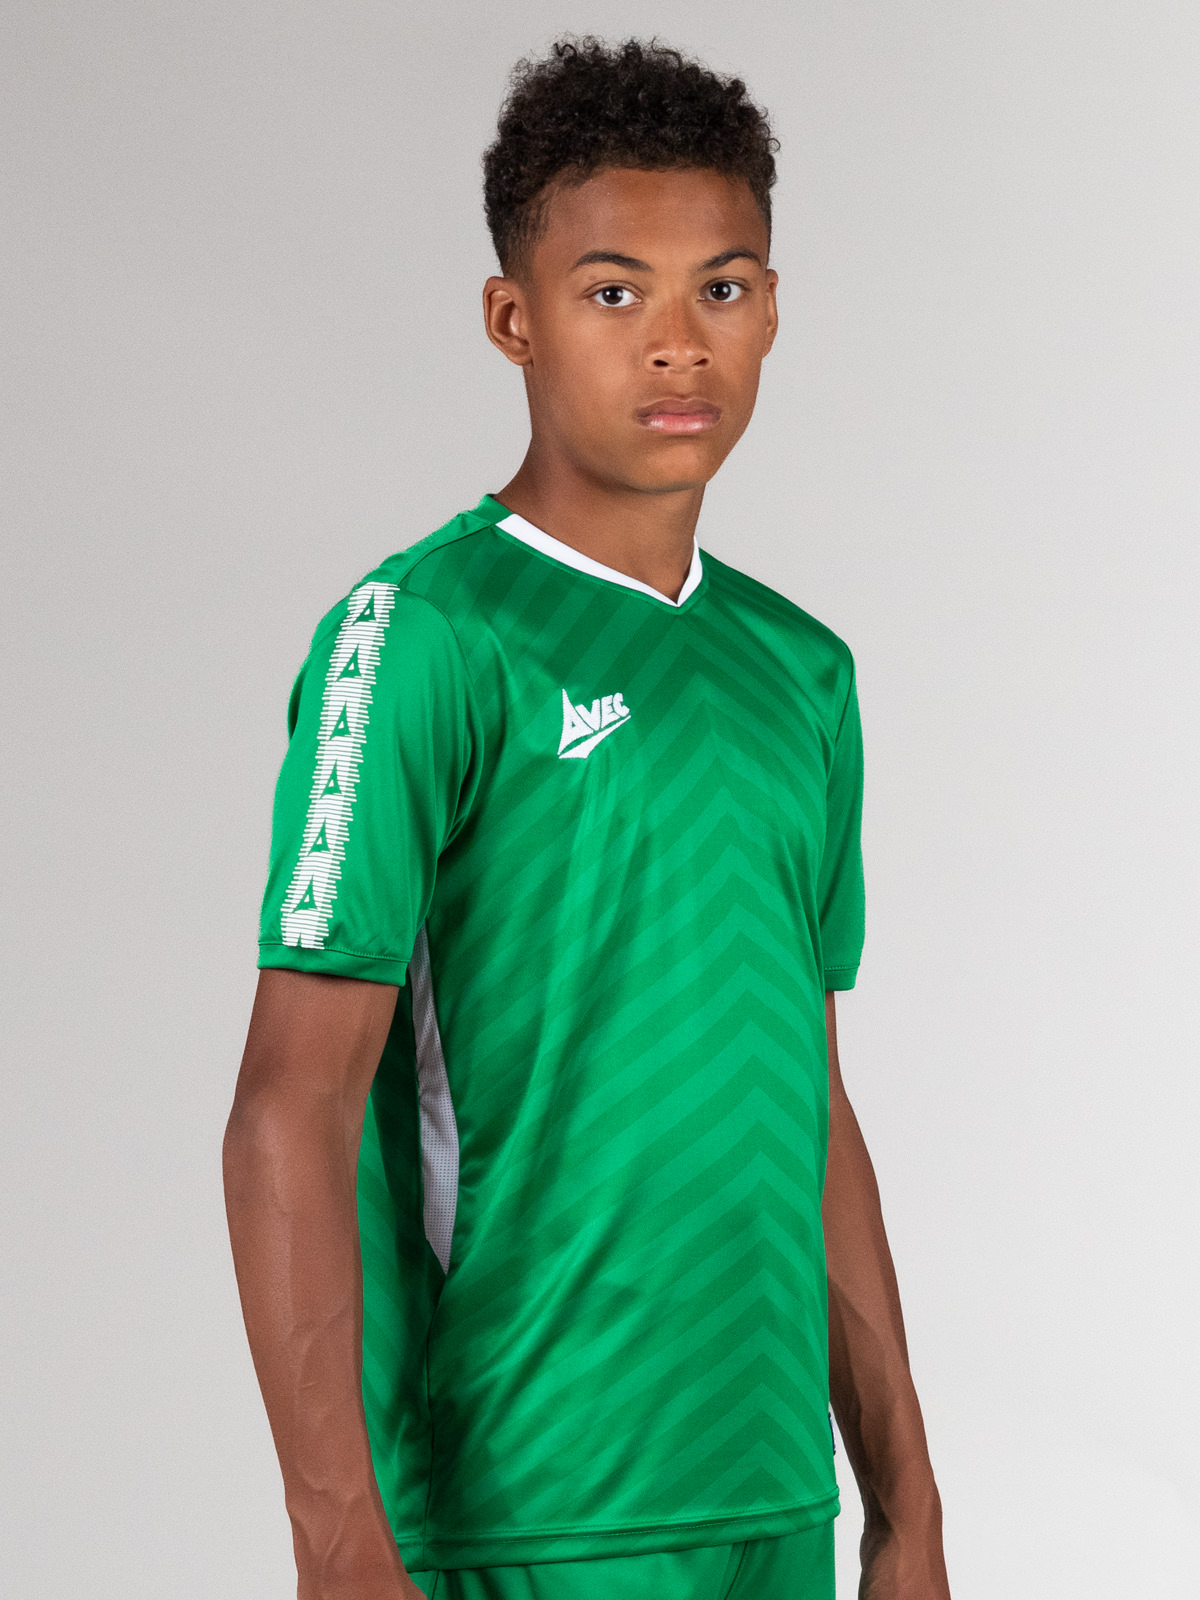 picture of team id pro jersey - green